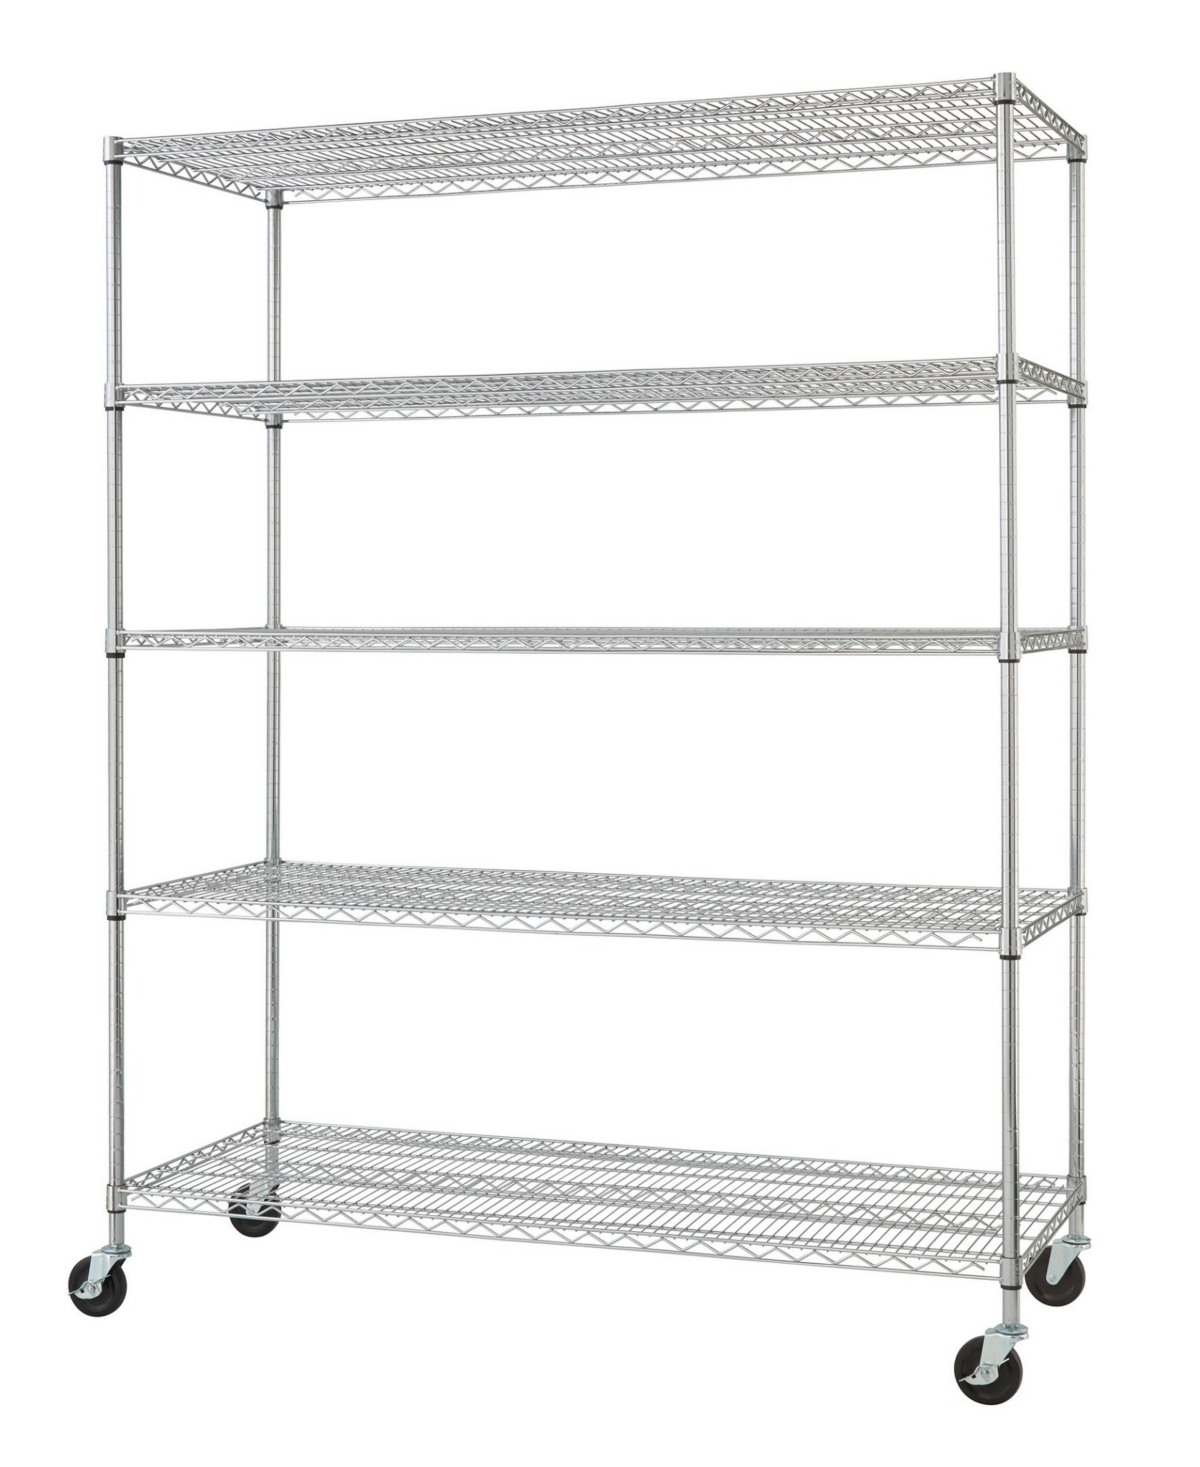 Basics Ecostorage 5-Tier Wire Shelving Rack with Nsf Includes Wheels - Chrome